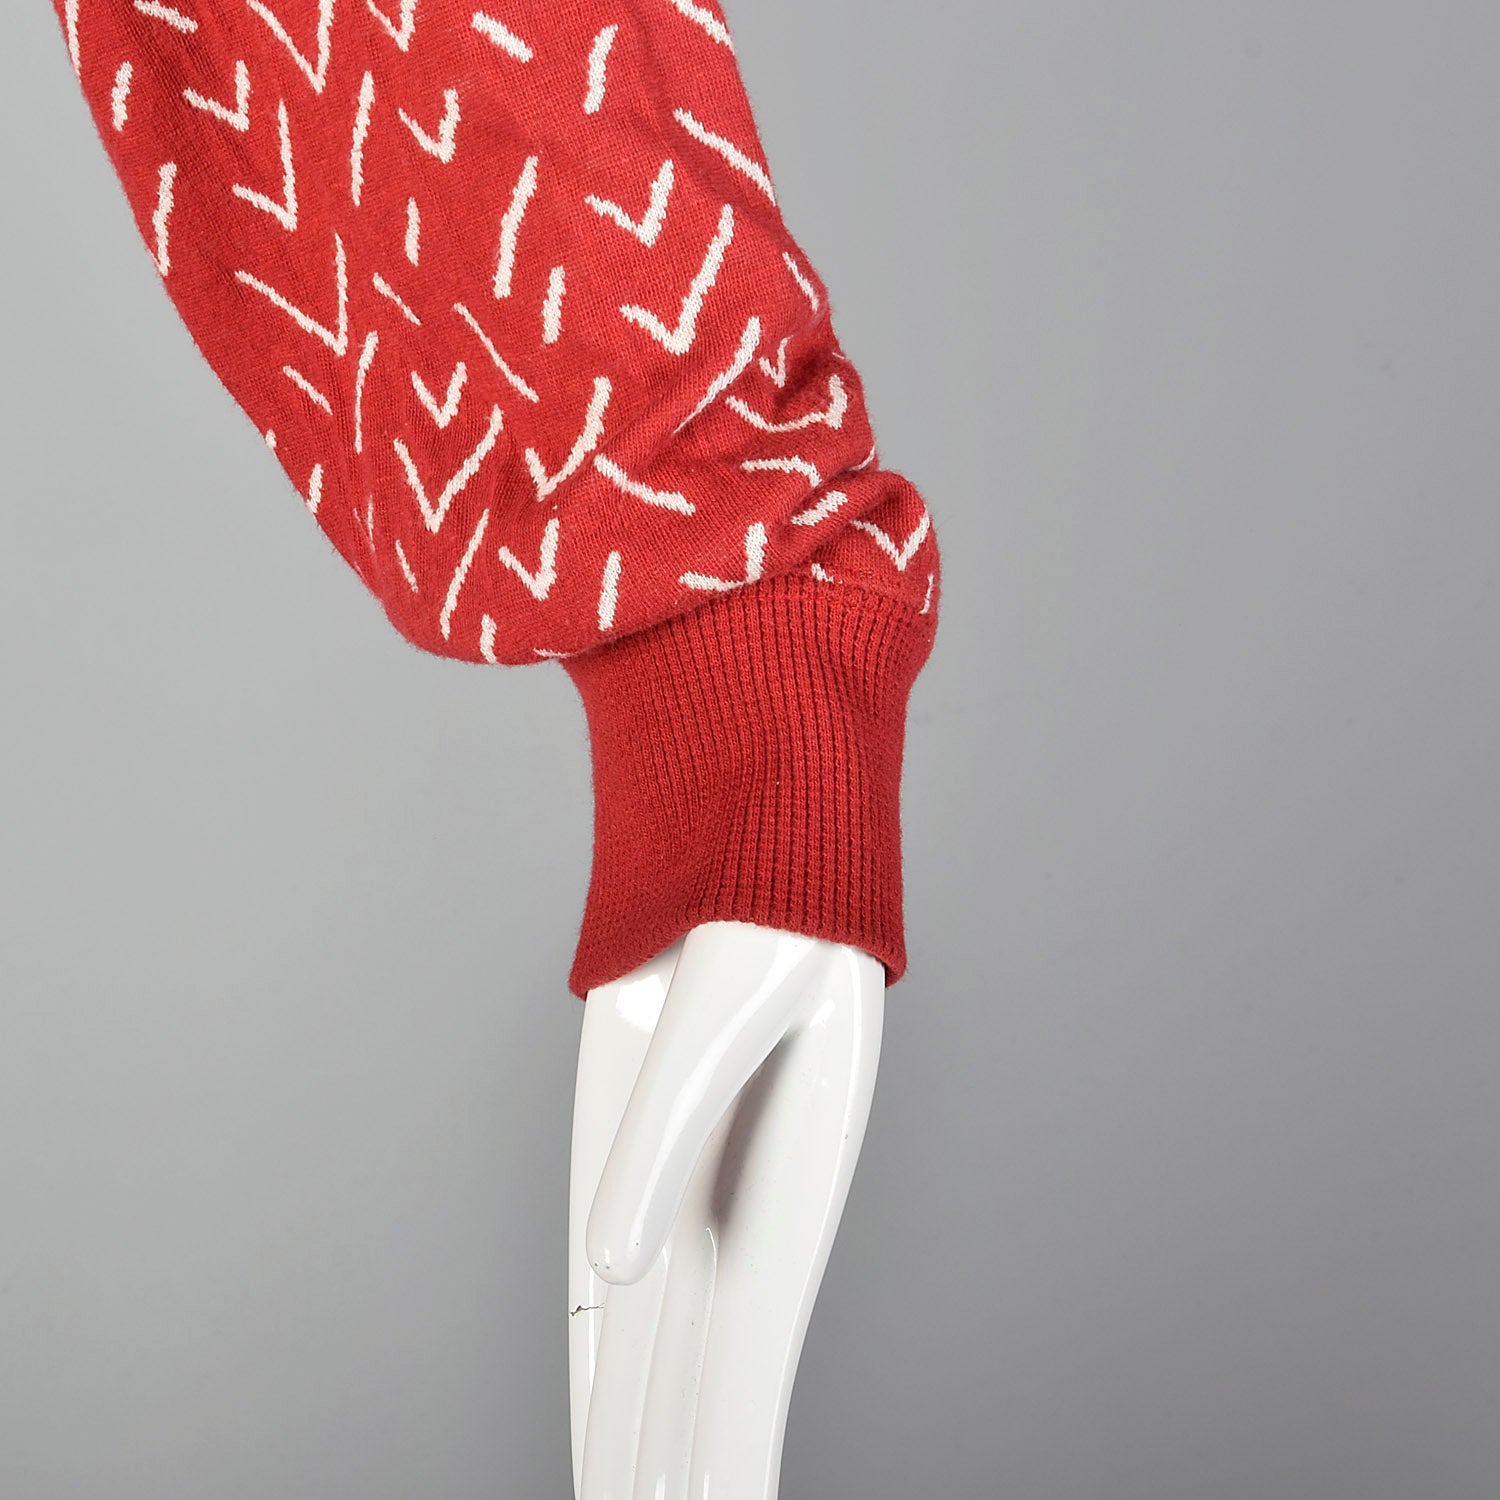 Issey Miyake Plantation 1980s Red Two Piece